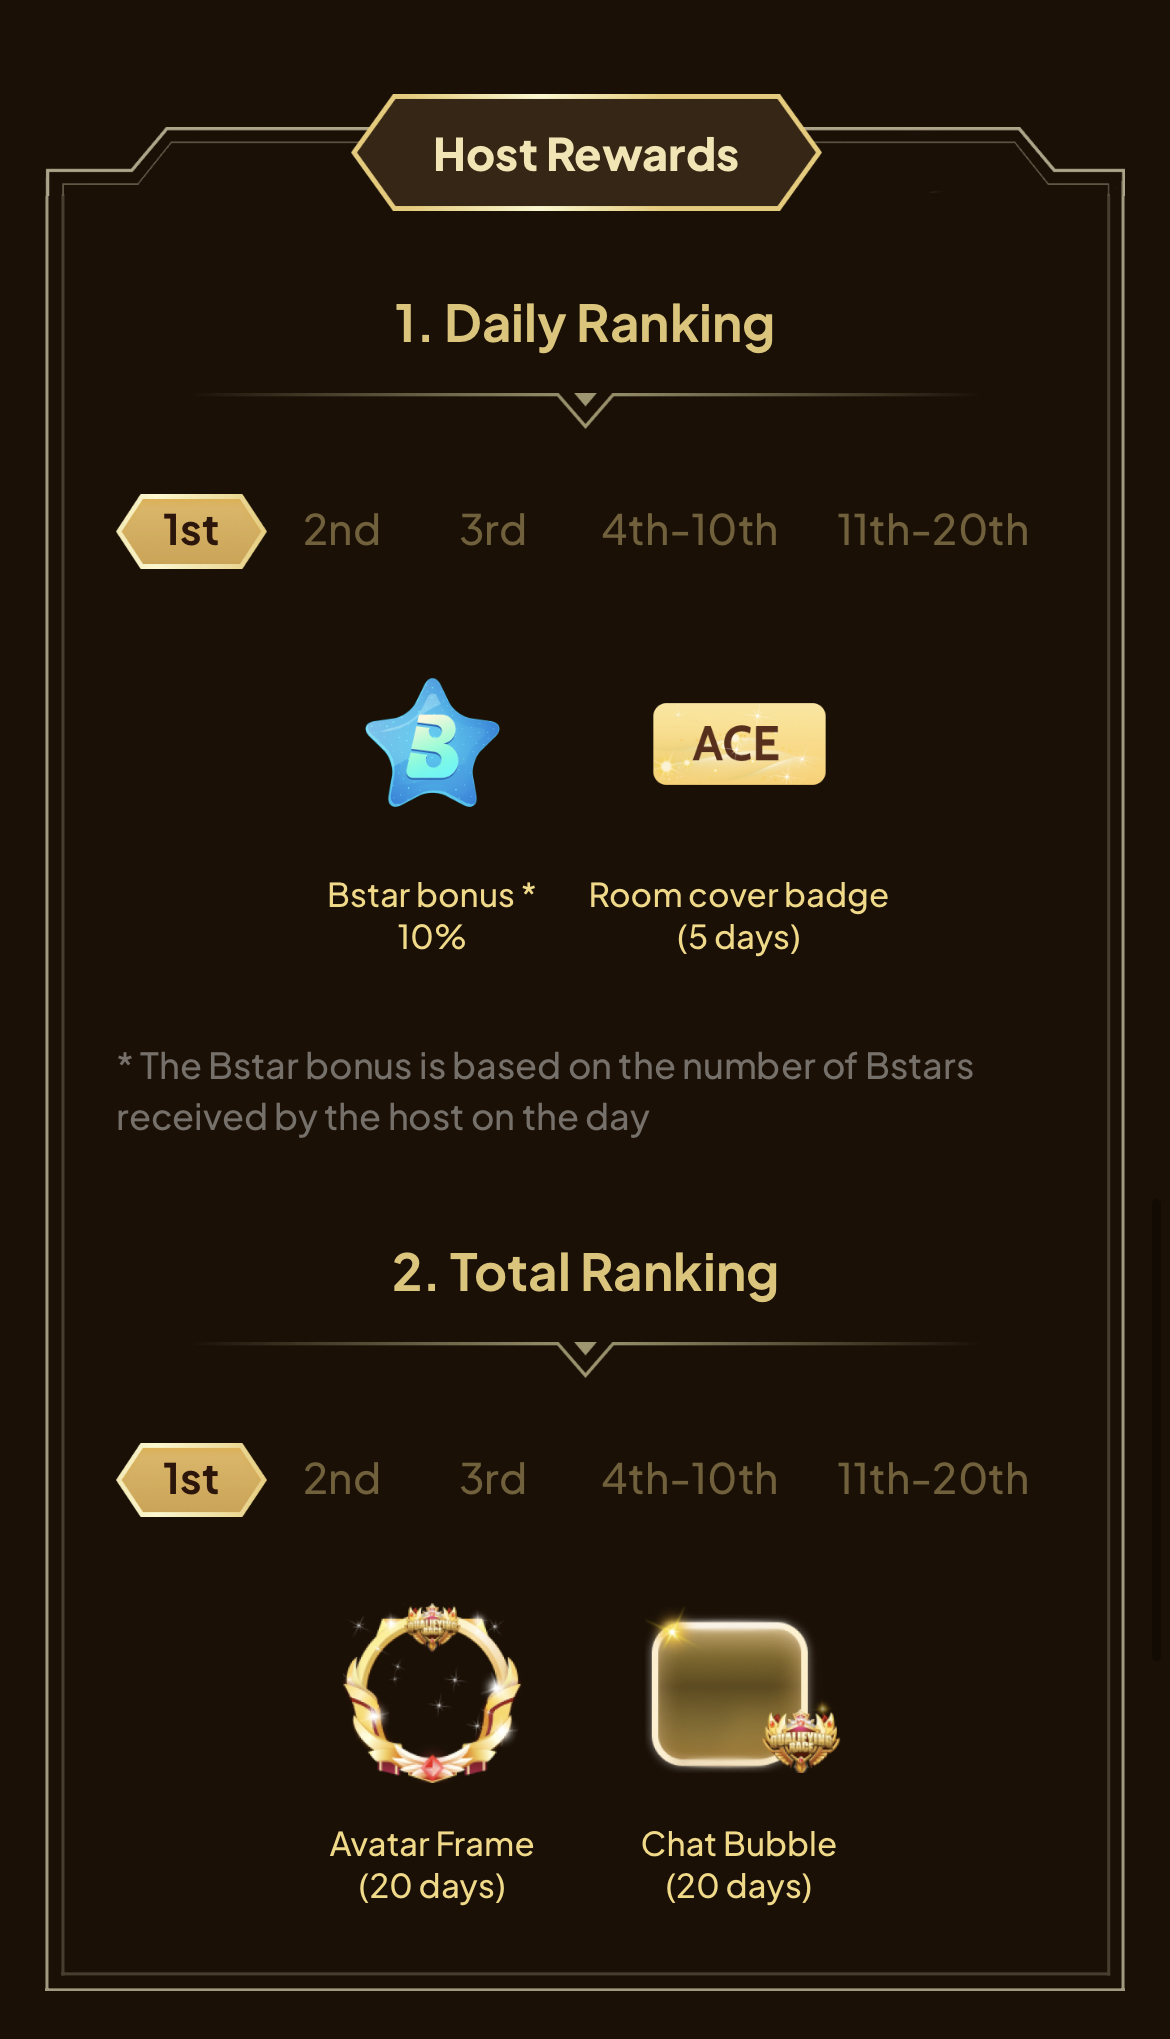 [BoomLive Campaign] Join the Host Qualifying Race and be the Ace.